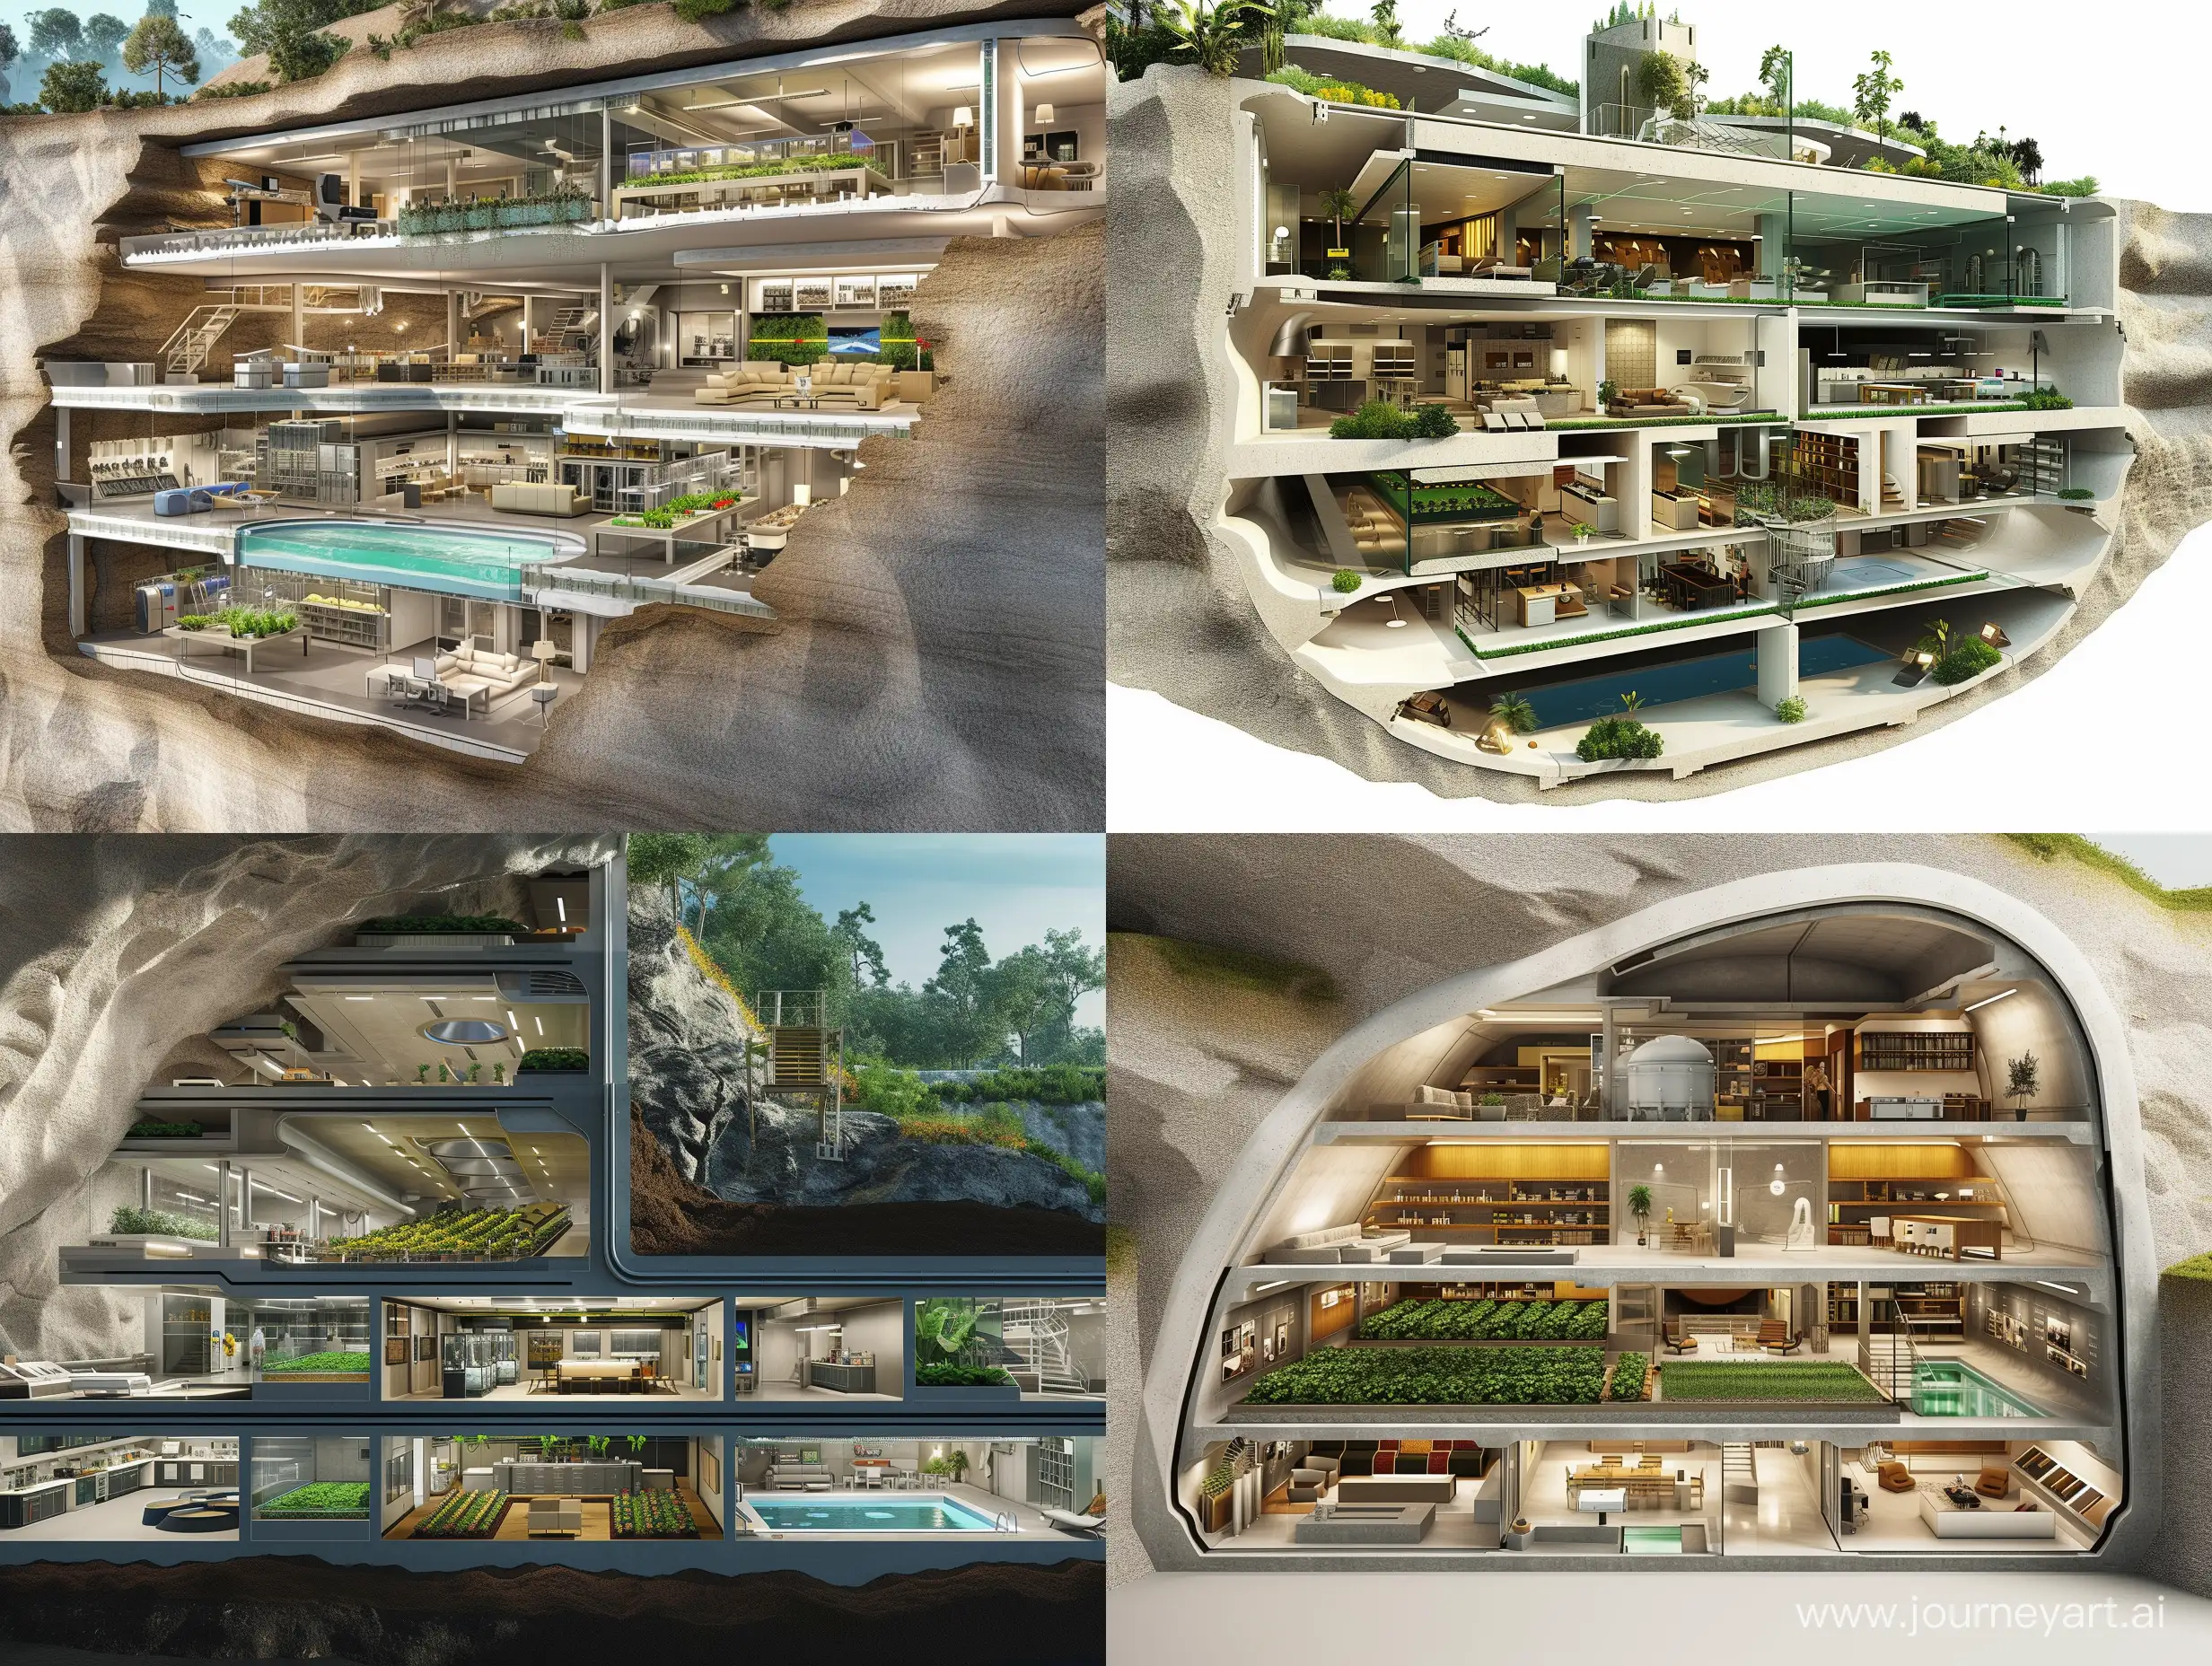 Luxurious-Underground-Residence-with-Mysterious-Laboratories-and-Indoor-Gardens